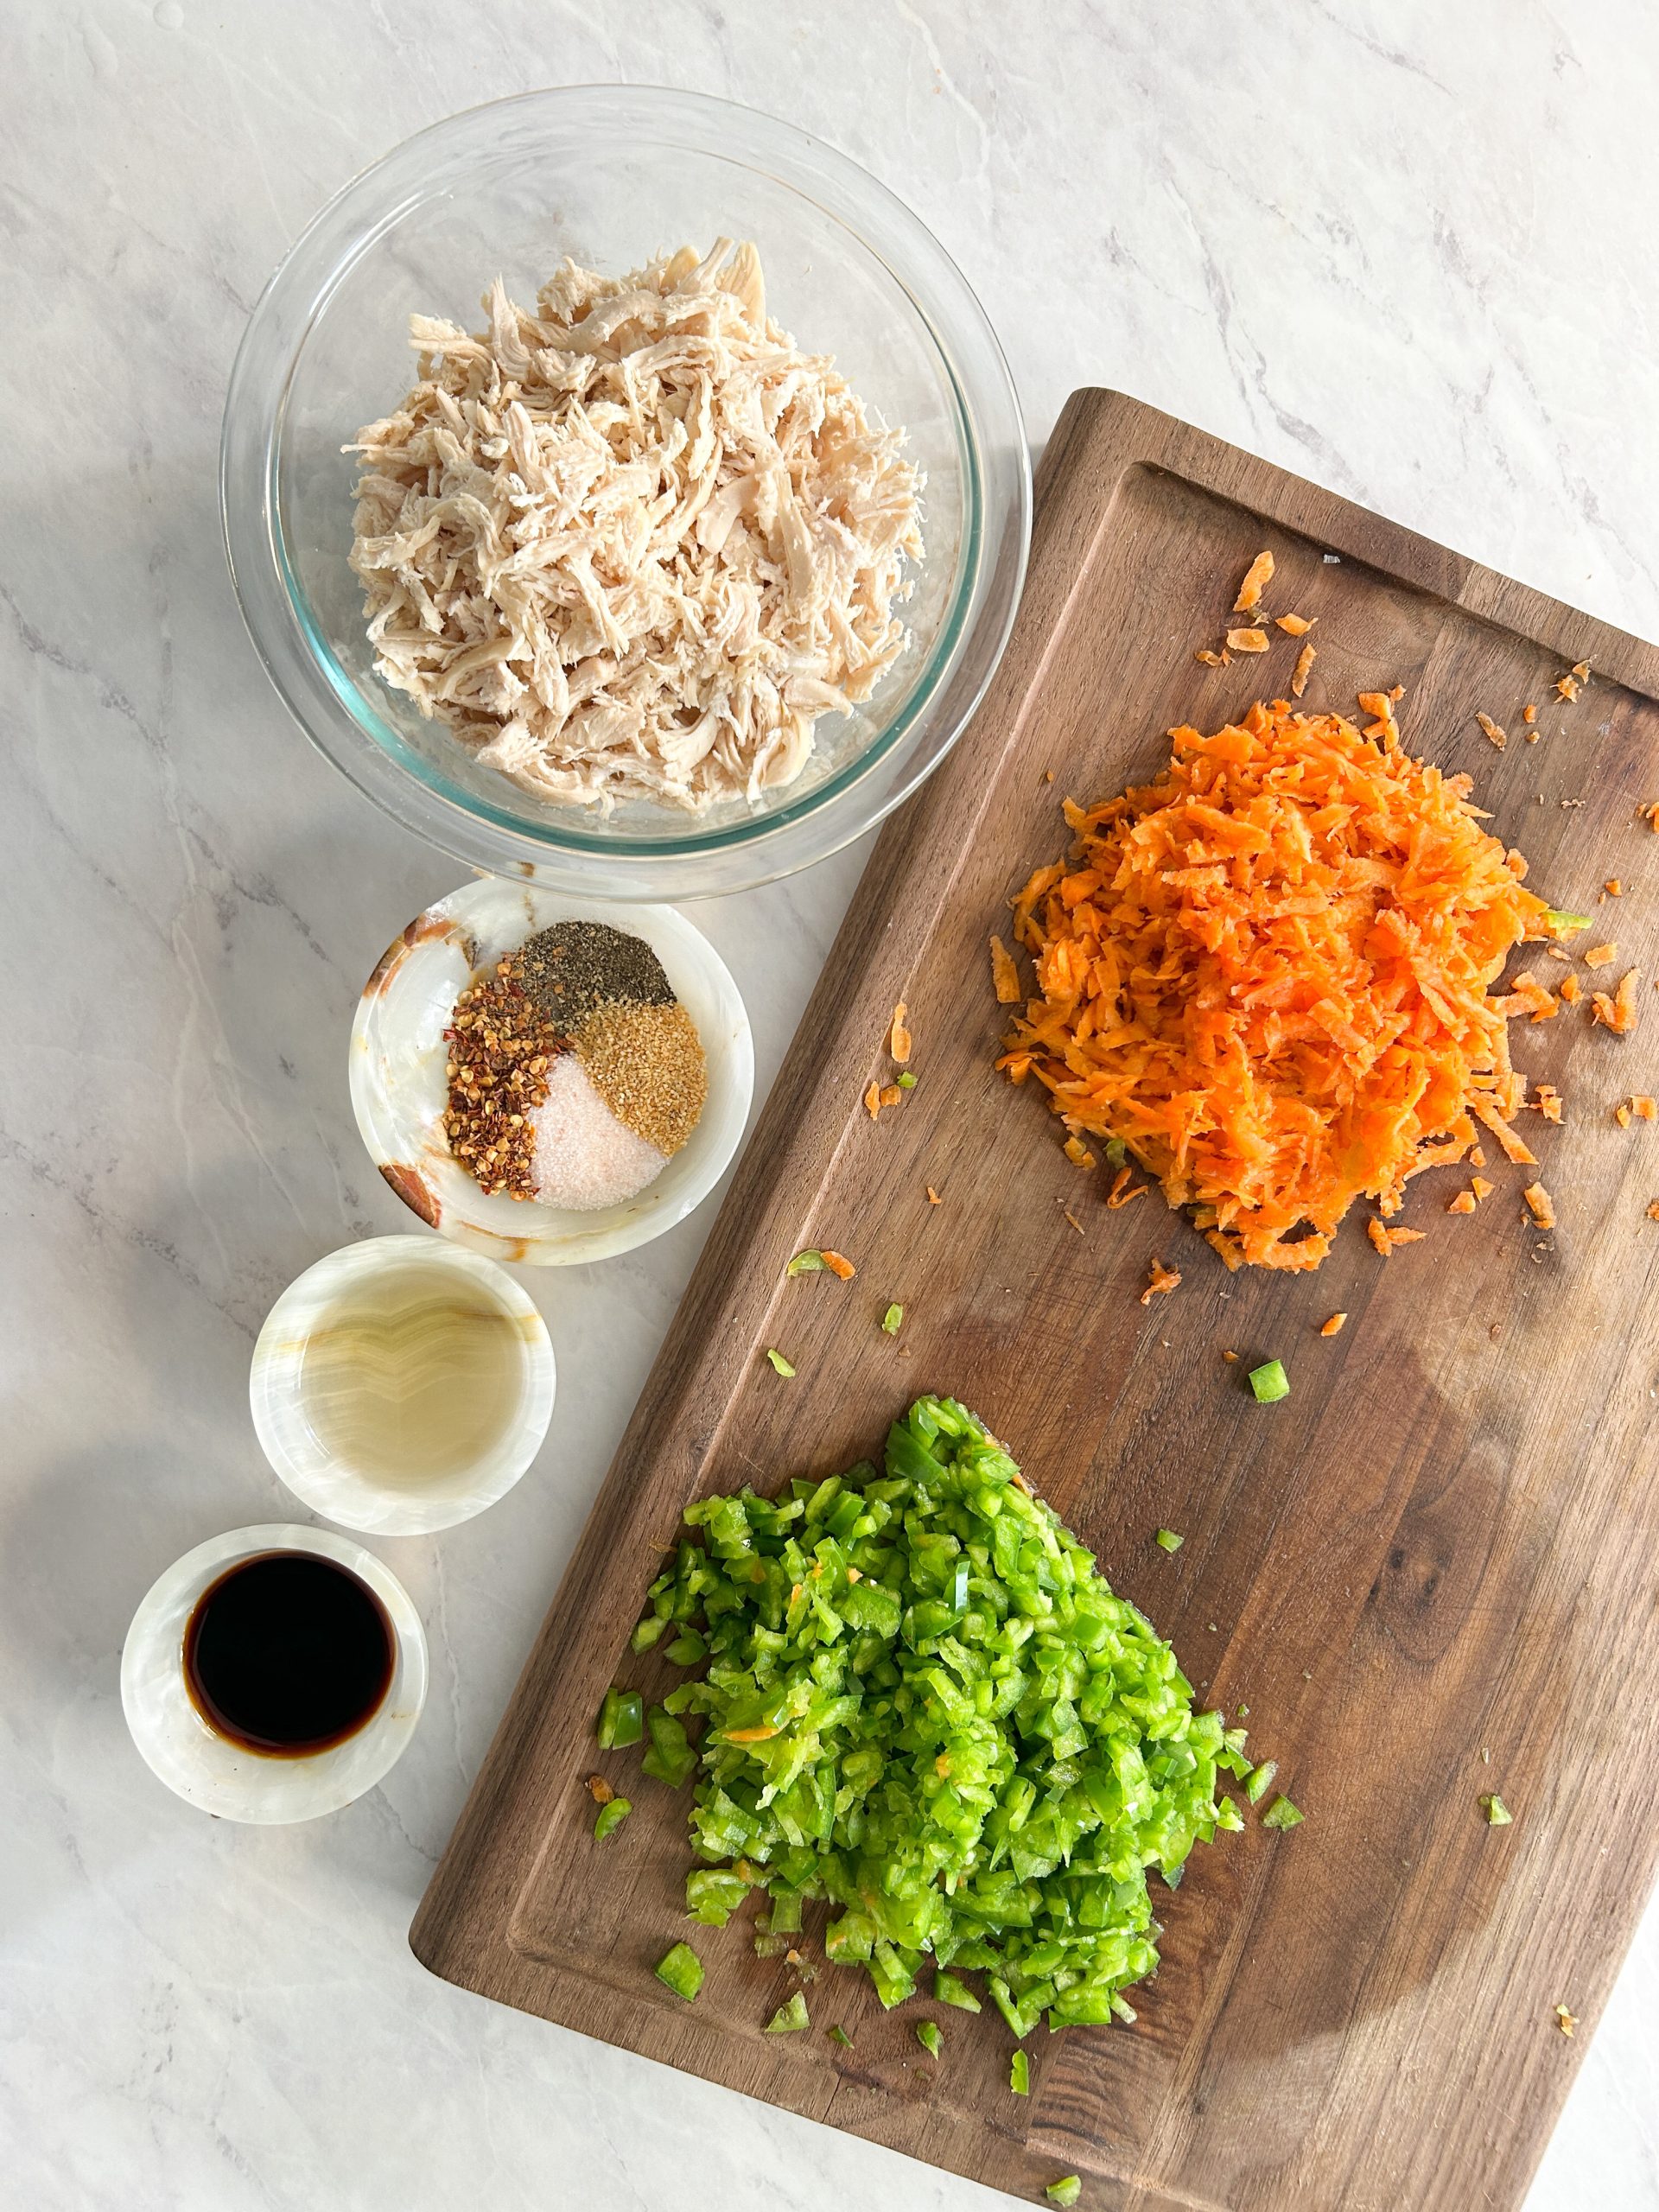 array of ingredients: shredded chicken, carrots, bell peppers, spices and condiments